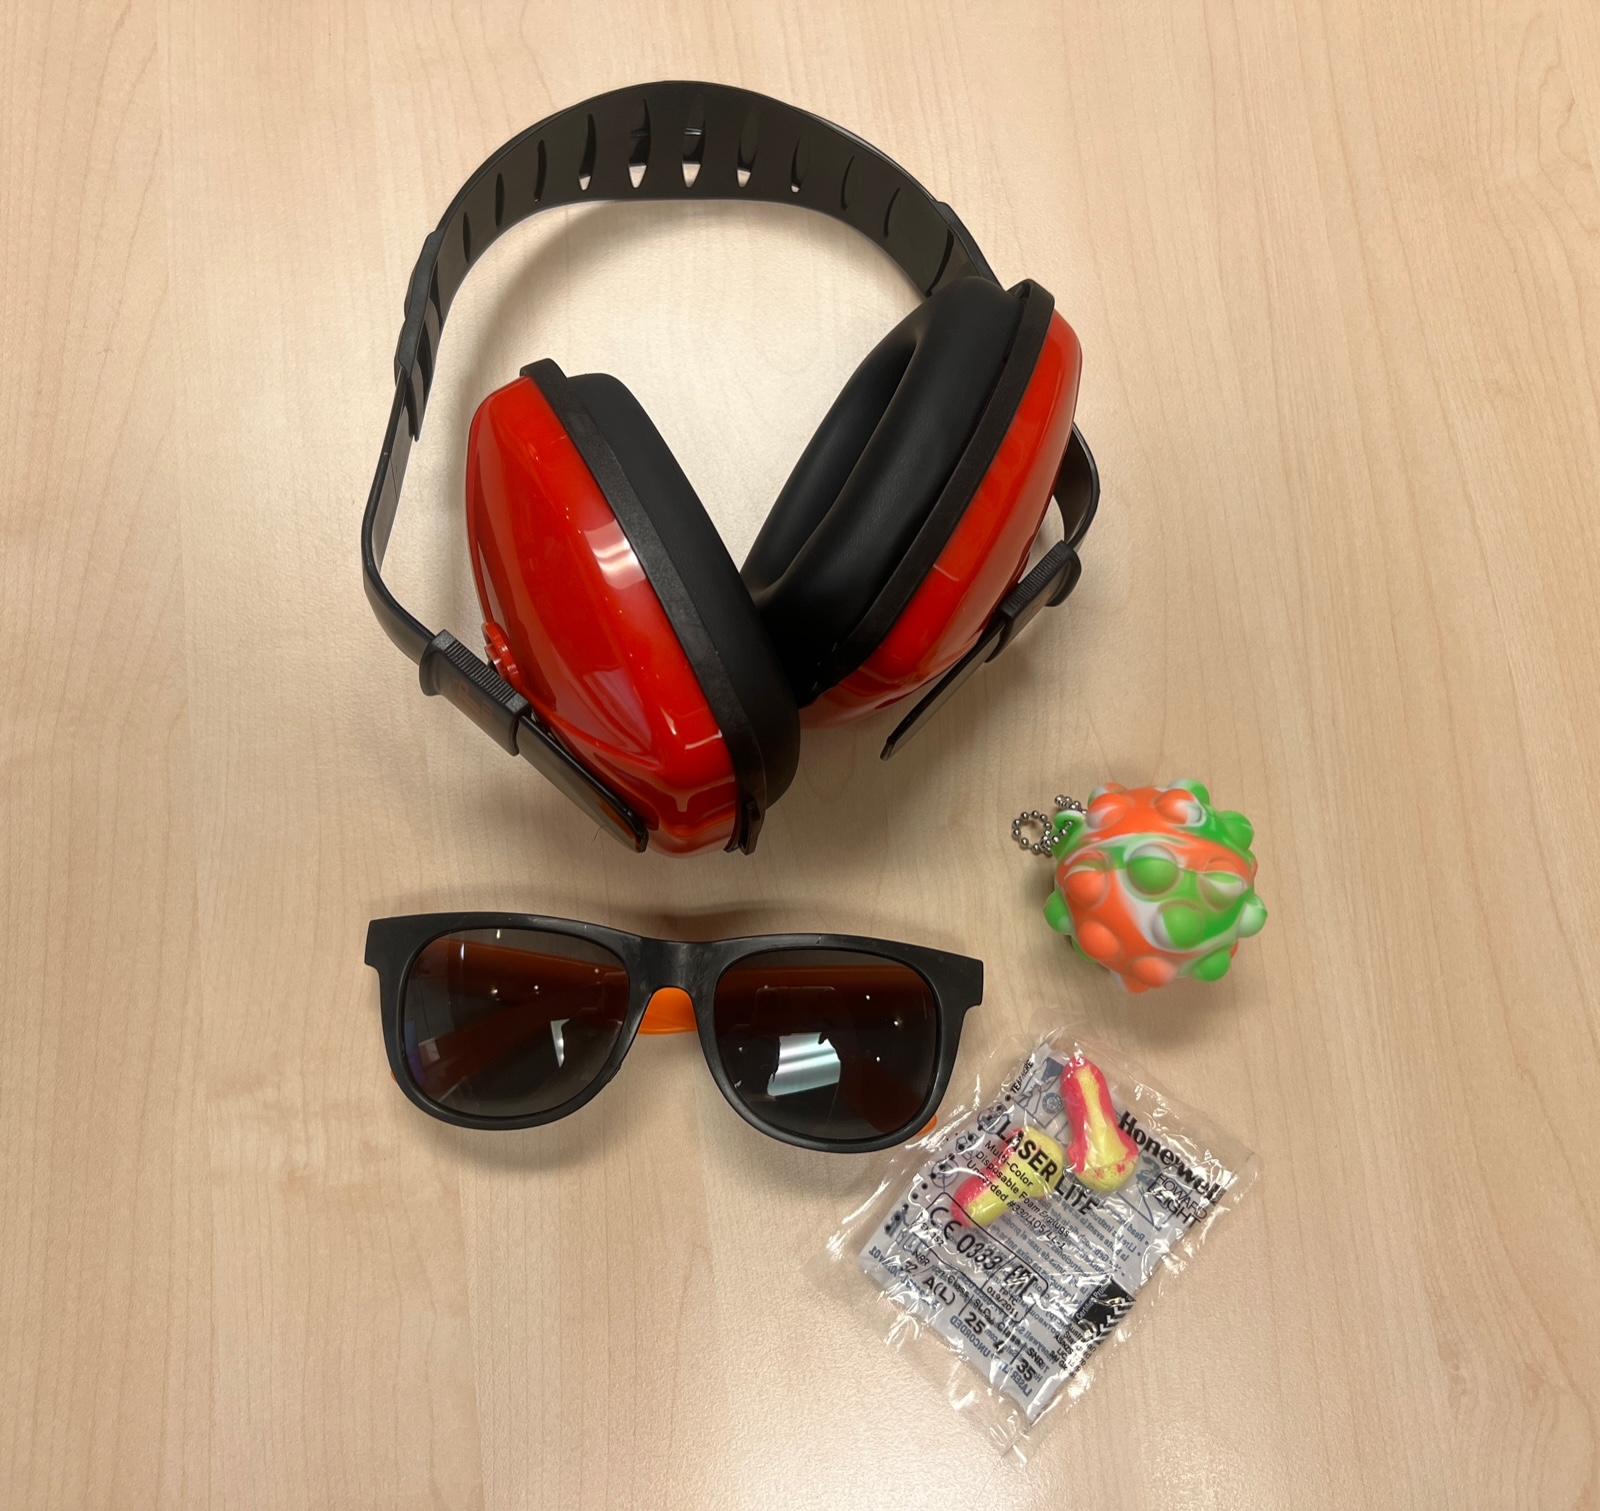 The items found in a Citadel Theatre Sensory kit are displayed. These items include a set of soft earplugs, a fidget item, adjustable ear muffling headphones, and sunglasses.